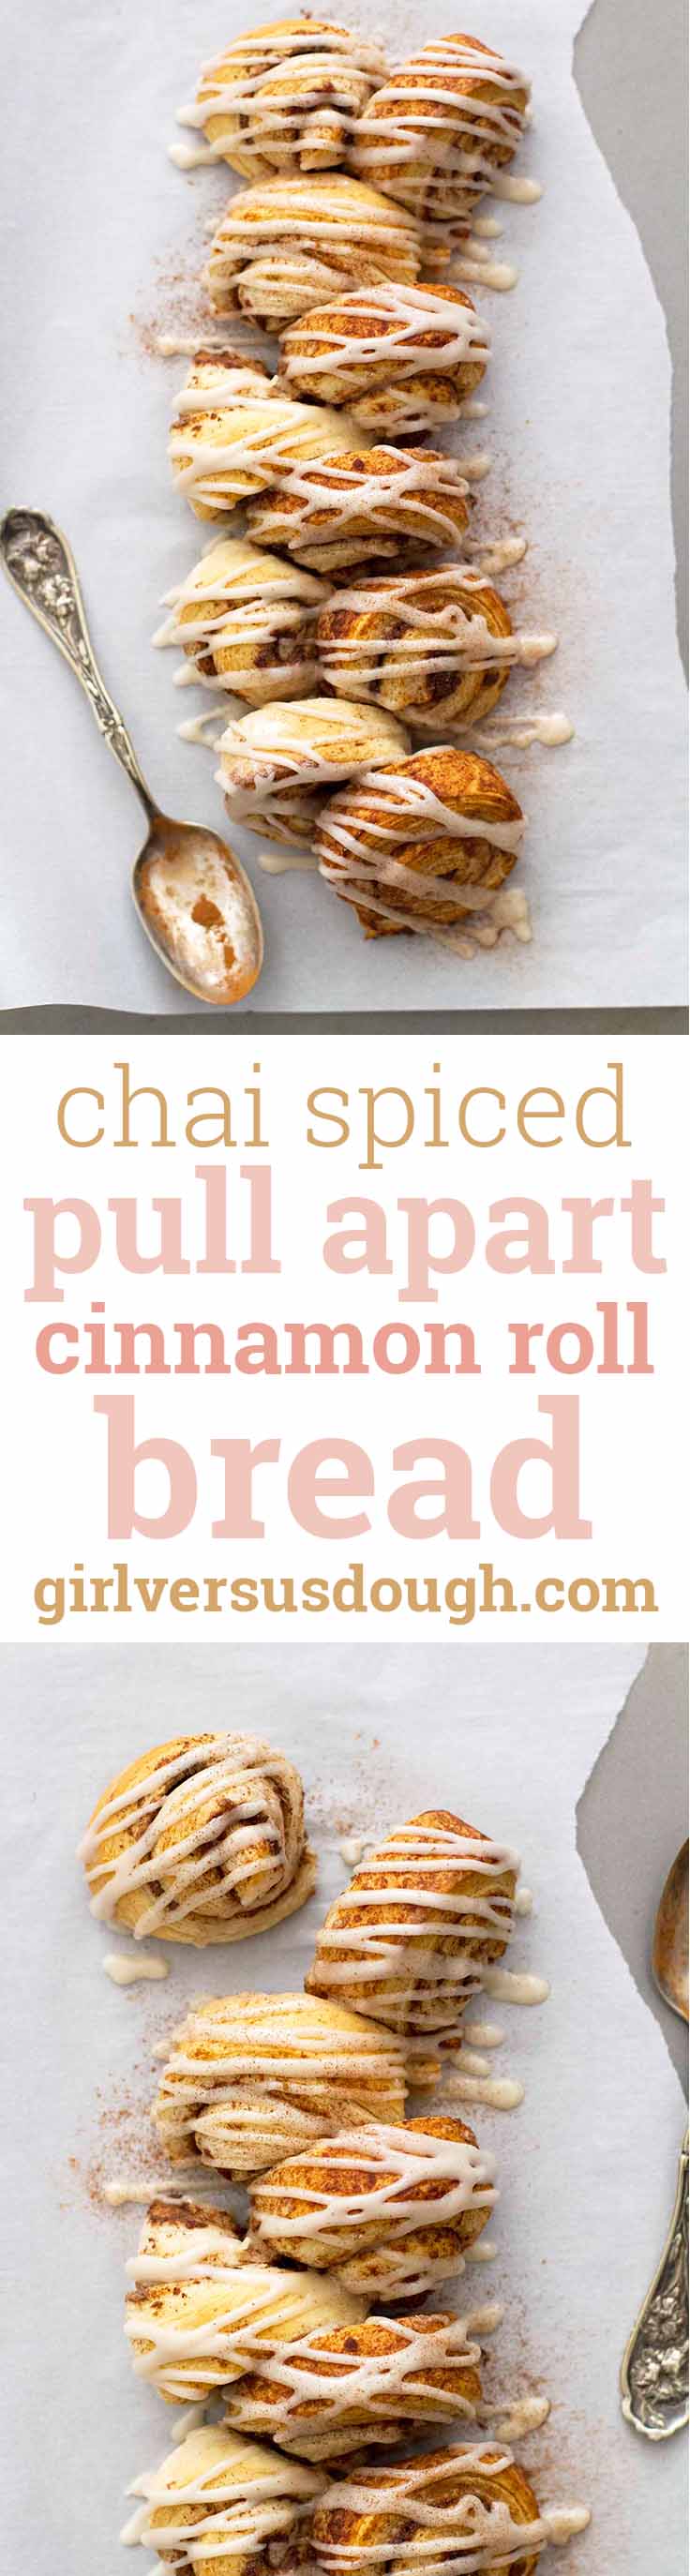 Chai Spiced Cinnamon Roll Pull Apart Bread -- cinnamon rolls flavored with chai spices and baked into a deliciously sweet pull-apart loaf that's perfect for a breakfast bunch! www.girlversusdough.com @girlversusdough